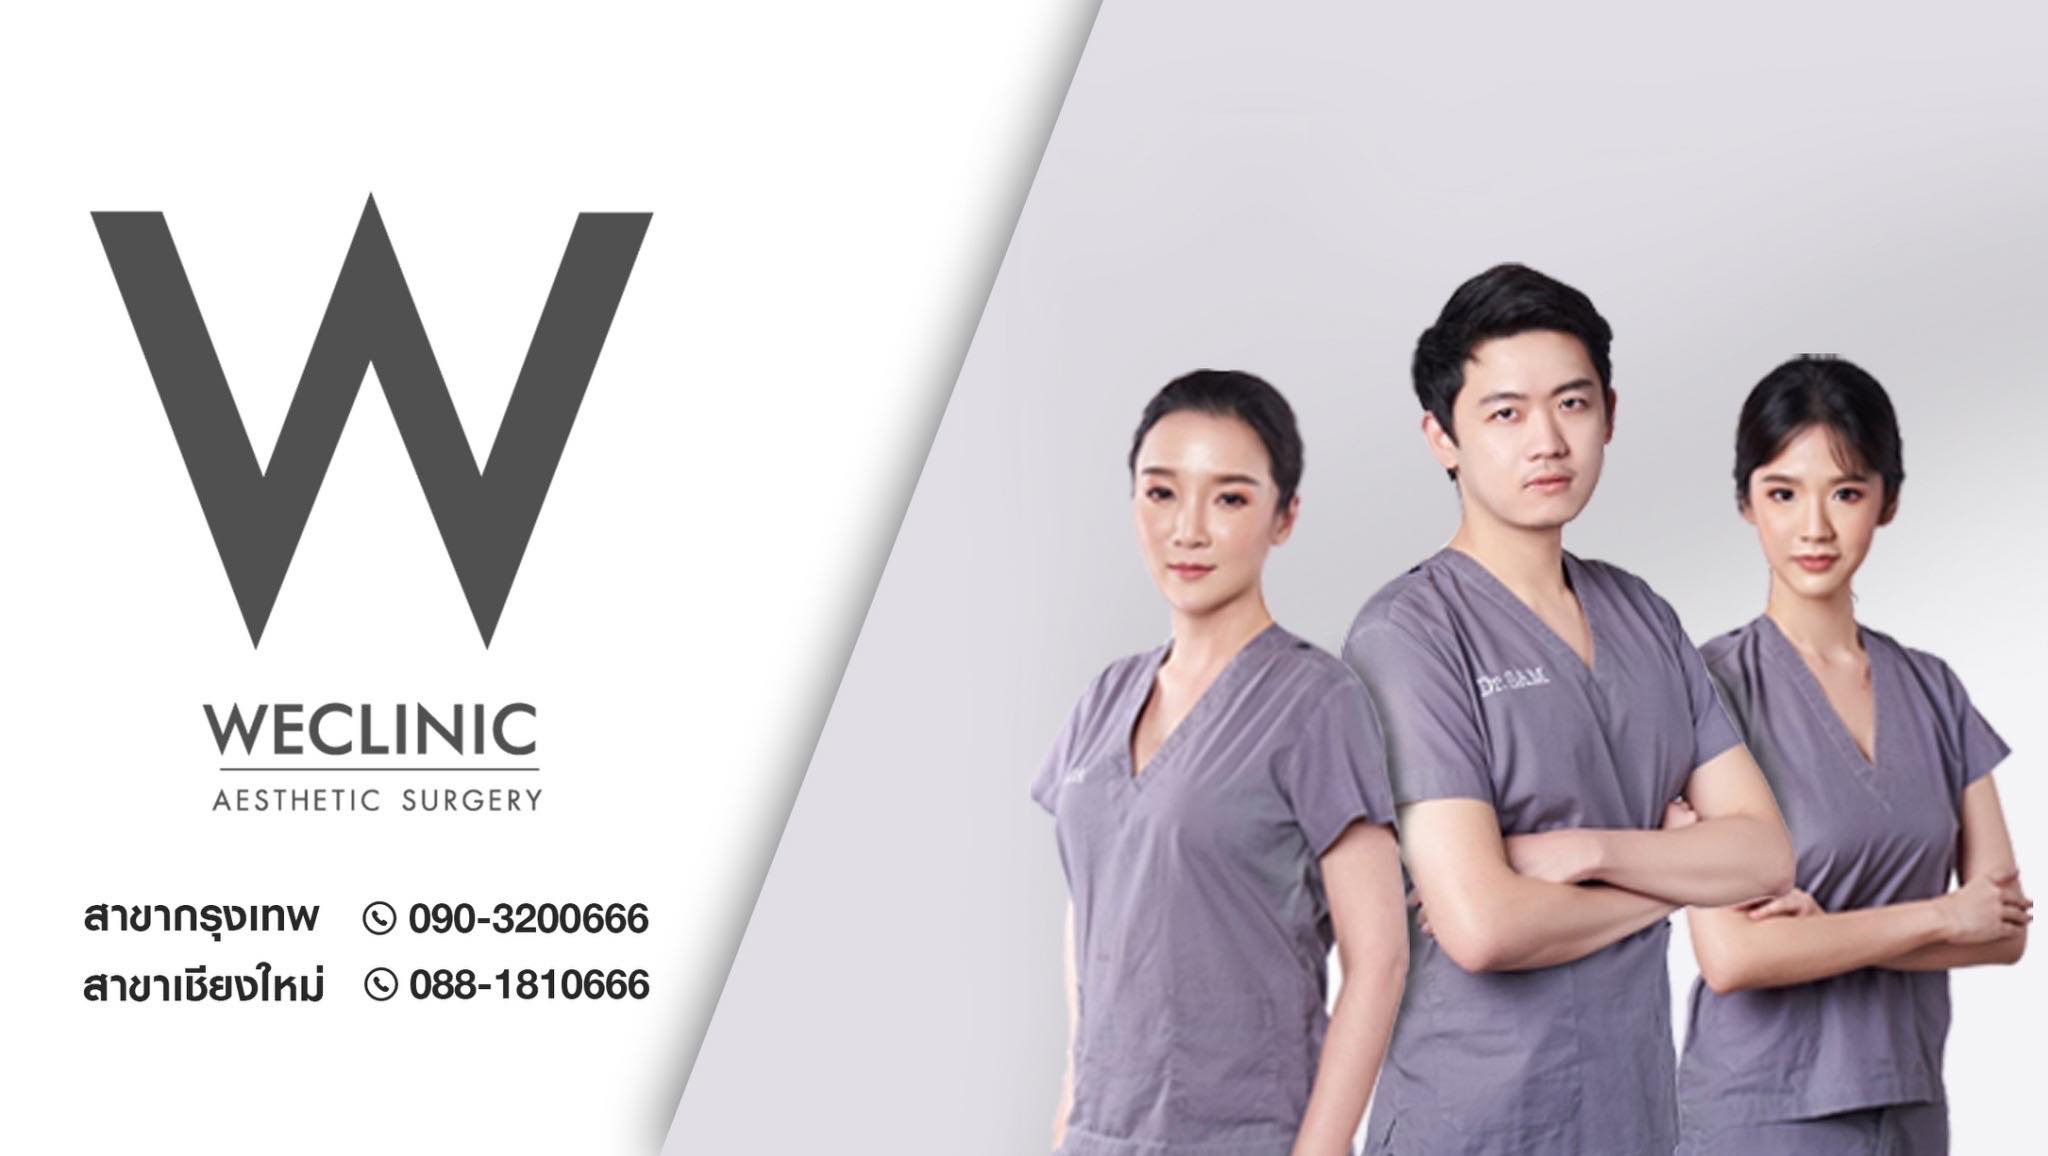 WE CLINIC